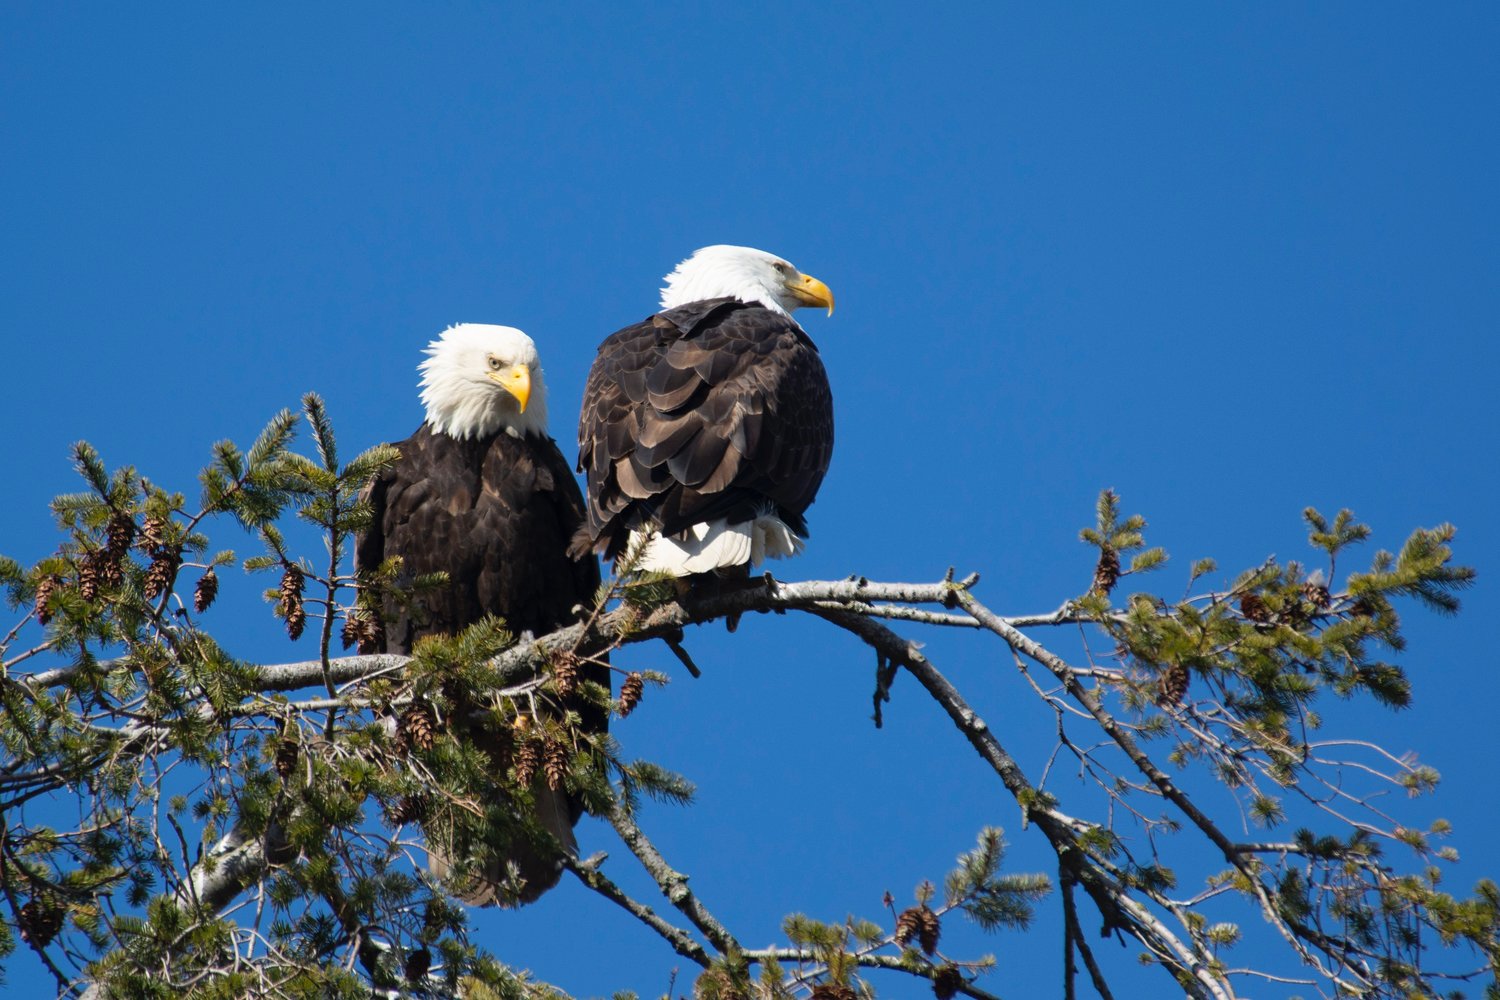 Viewing bald eagles that congregate in the Upper Delaware wintering areas has become a popular wildlife-watching activity. Well-marked viewing sites are located on the river in Narrowsburg and Minisink Ford, NY, and in Lackawaxen, PA.